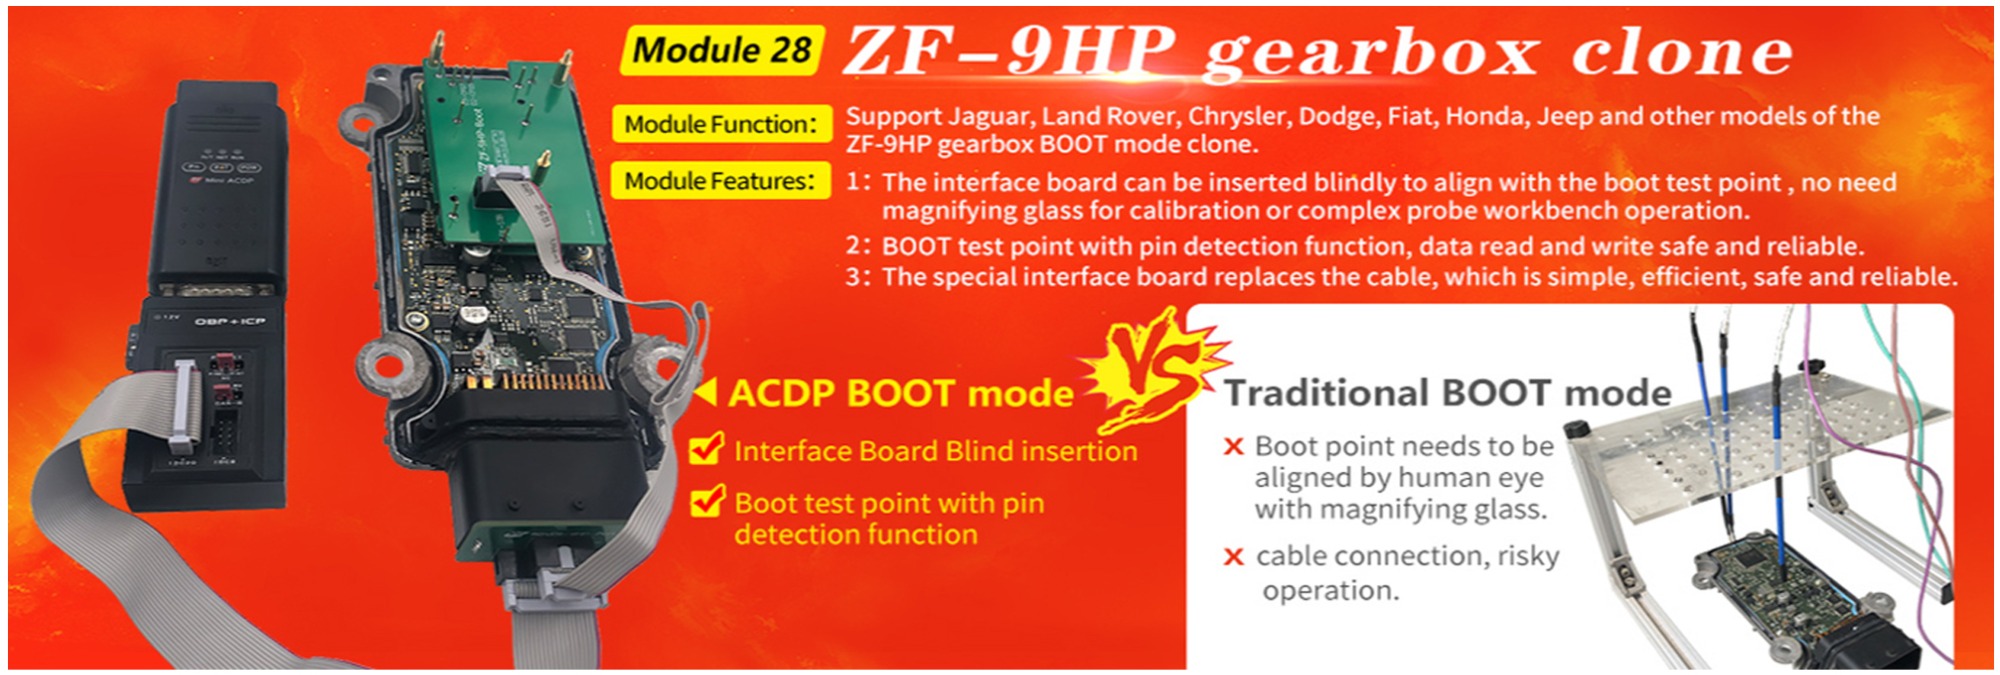 ACDP Programmer Module 28 for ZF-9HP Gearbox Clone Work via Boot Mode with License A703